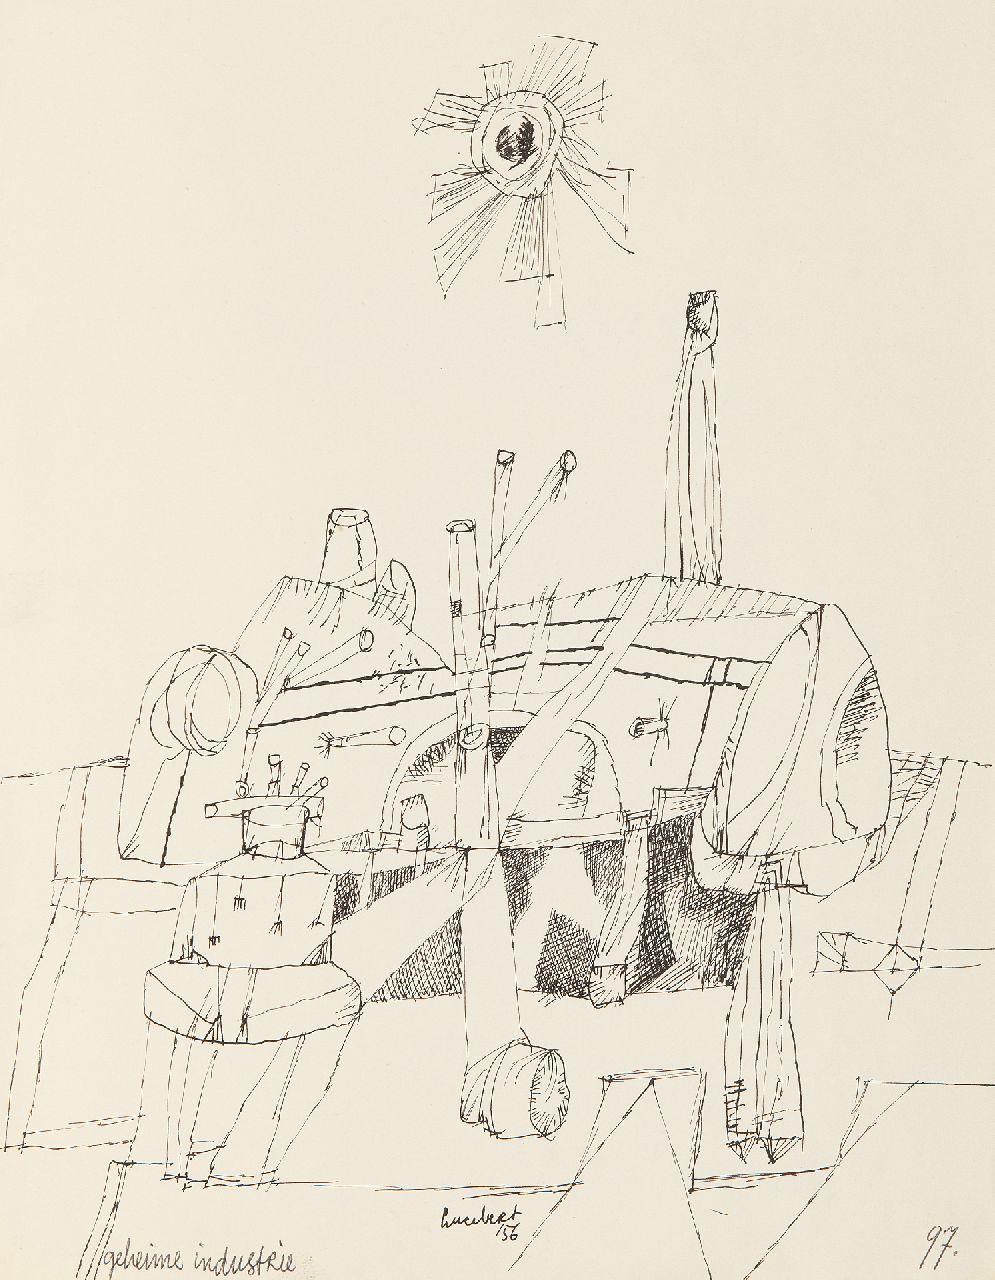 Lucebert (Lubertus Jacobus Swaanswijk)   | Lucebert (Lubertus Jacobus Swaanswijk) | Watercolours and drawings offered for sale | Geheime industrie (Secret industry), ink on paper 27.0 x 21.0 cm, signed l.c. and dated '56